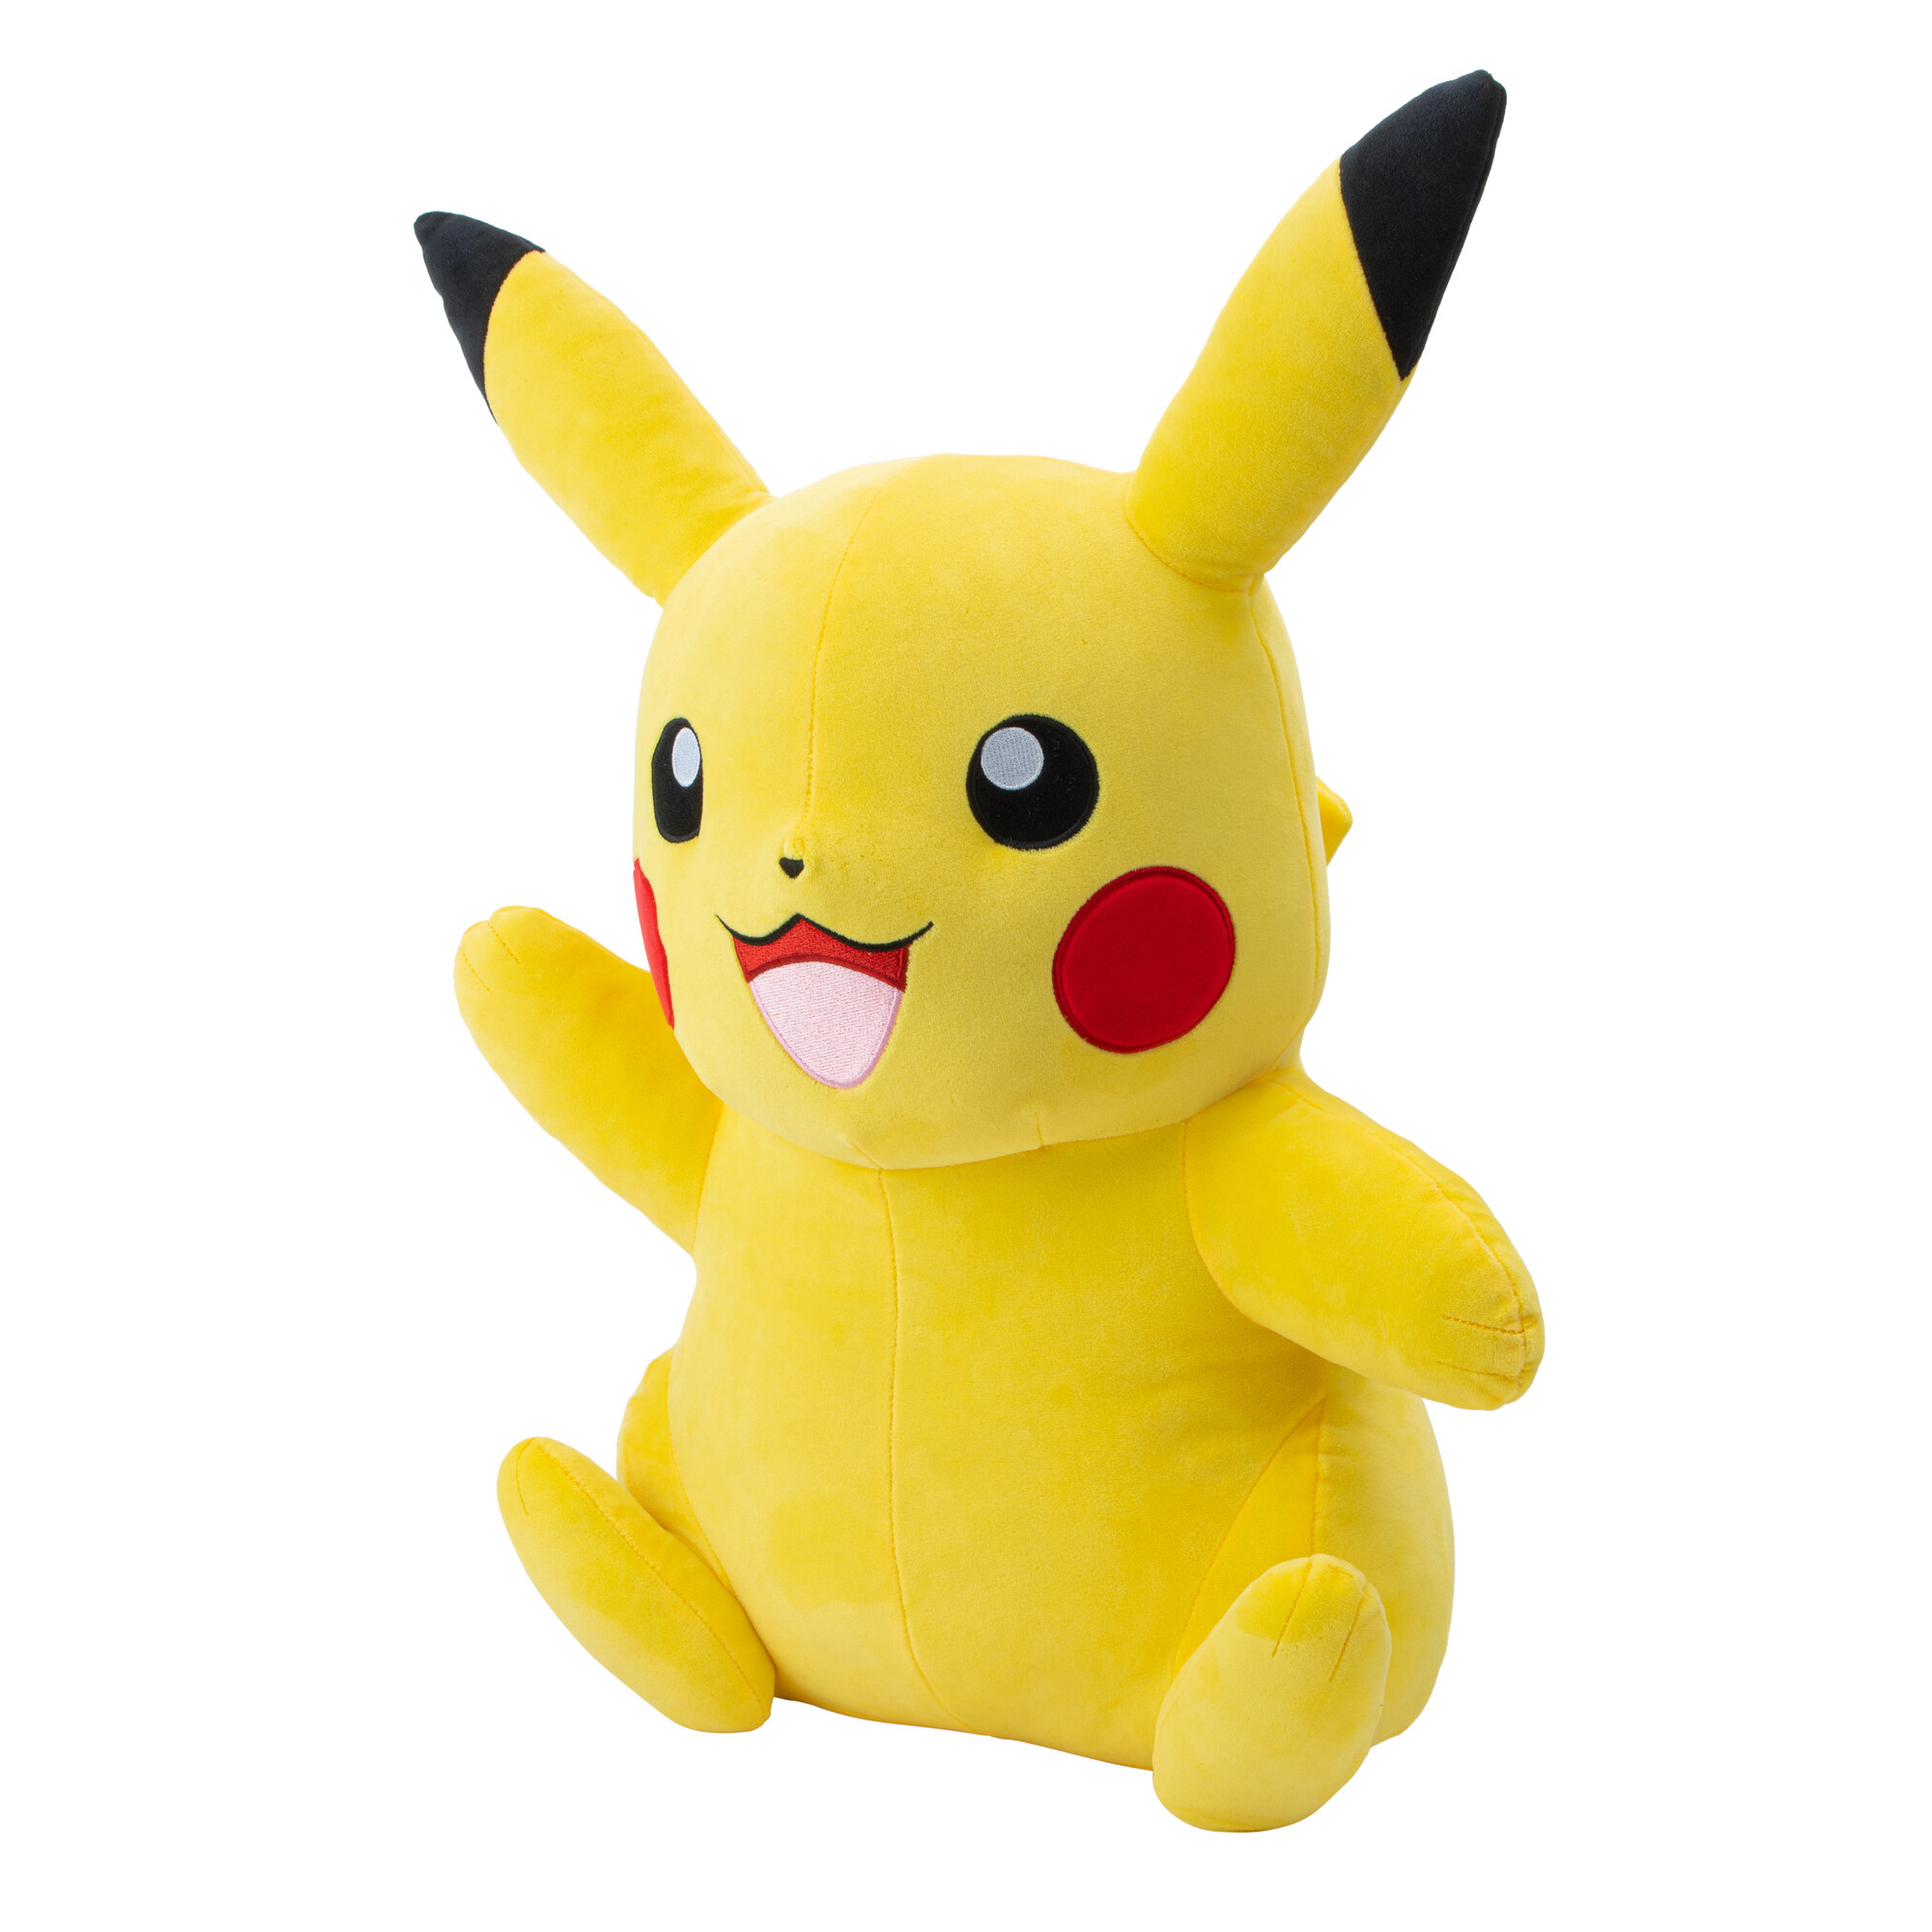 Pokemon Pikachu Plush - 24-inch Child's Plush with Authentic Details - image 3 of 5